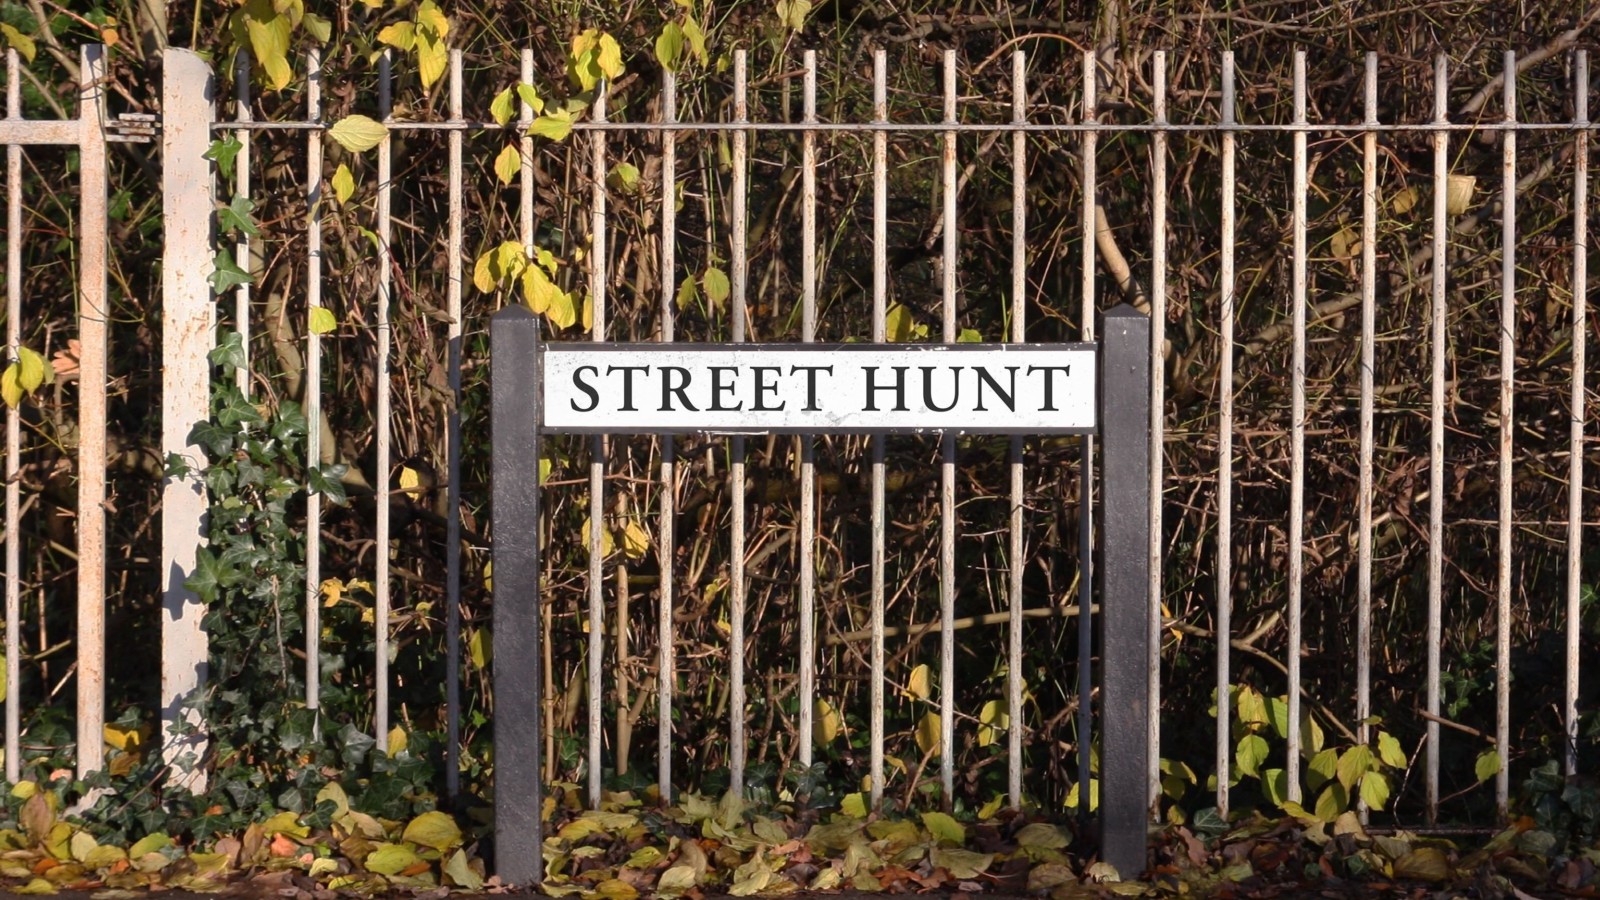 A street sign that reads 'Street Hunt' is in front of railings which have bushes behind them.